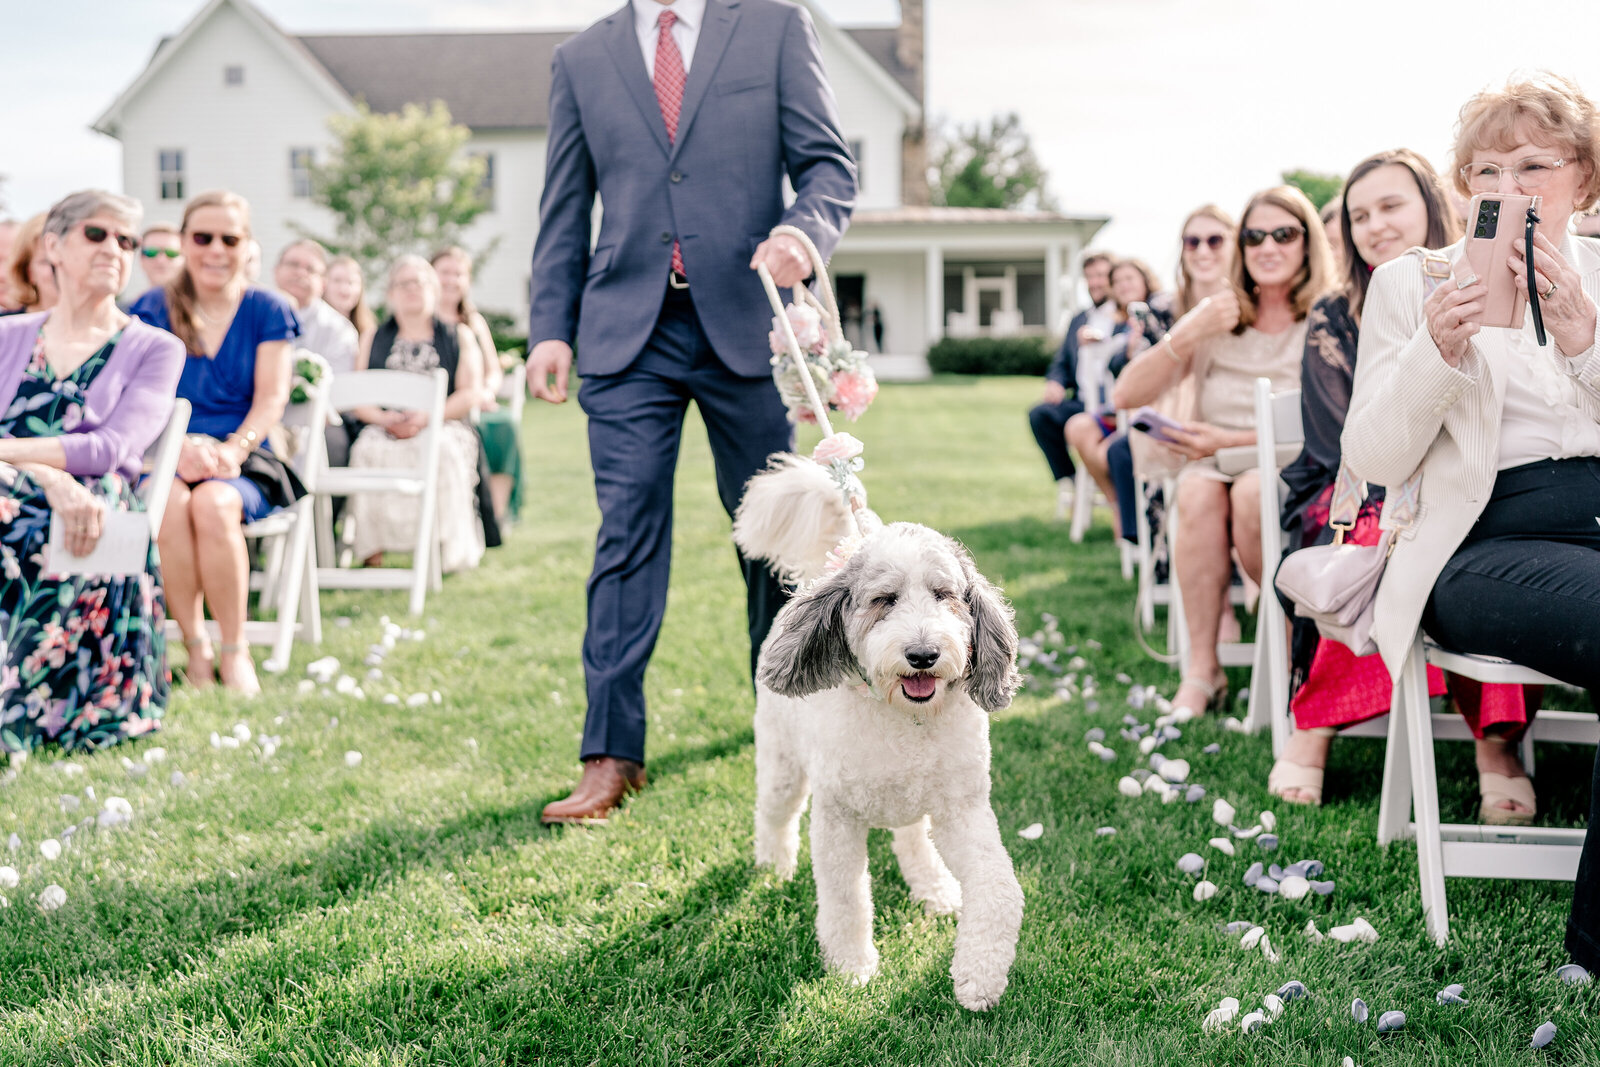 A flower dog going down the aisle during a wedding at Blue Hill Farm in Loudoun County